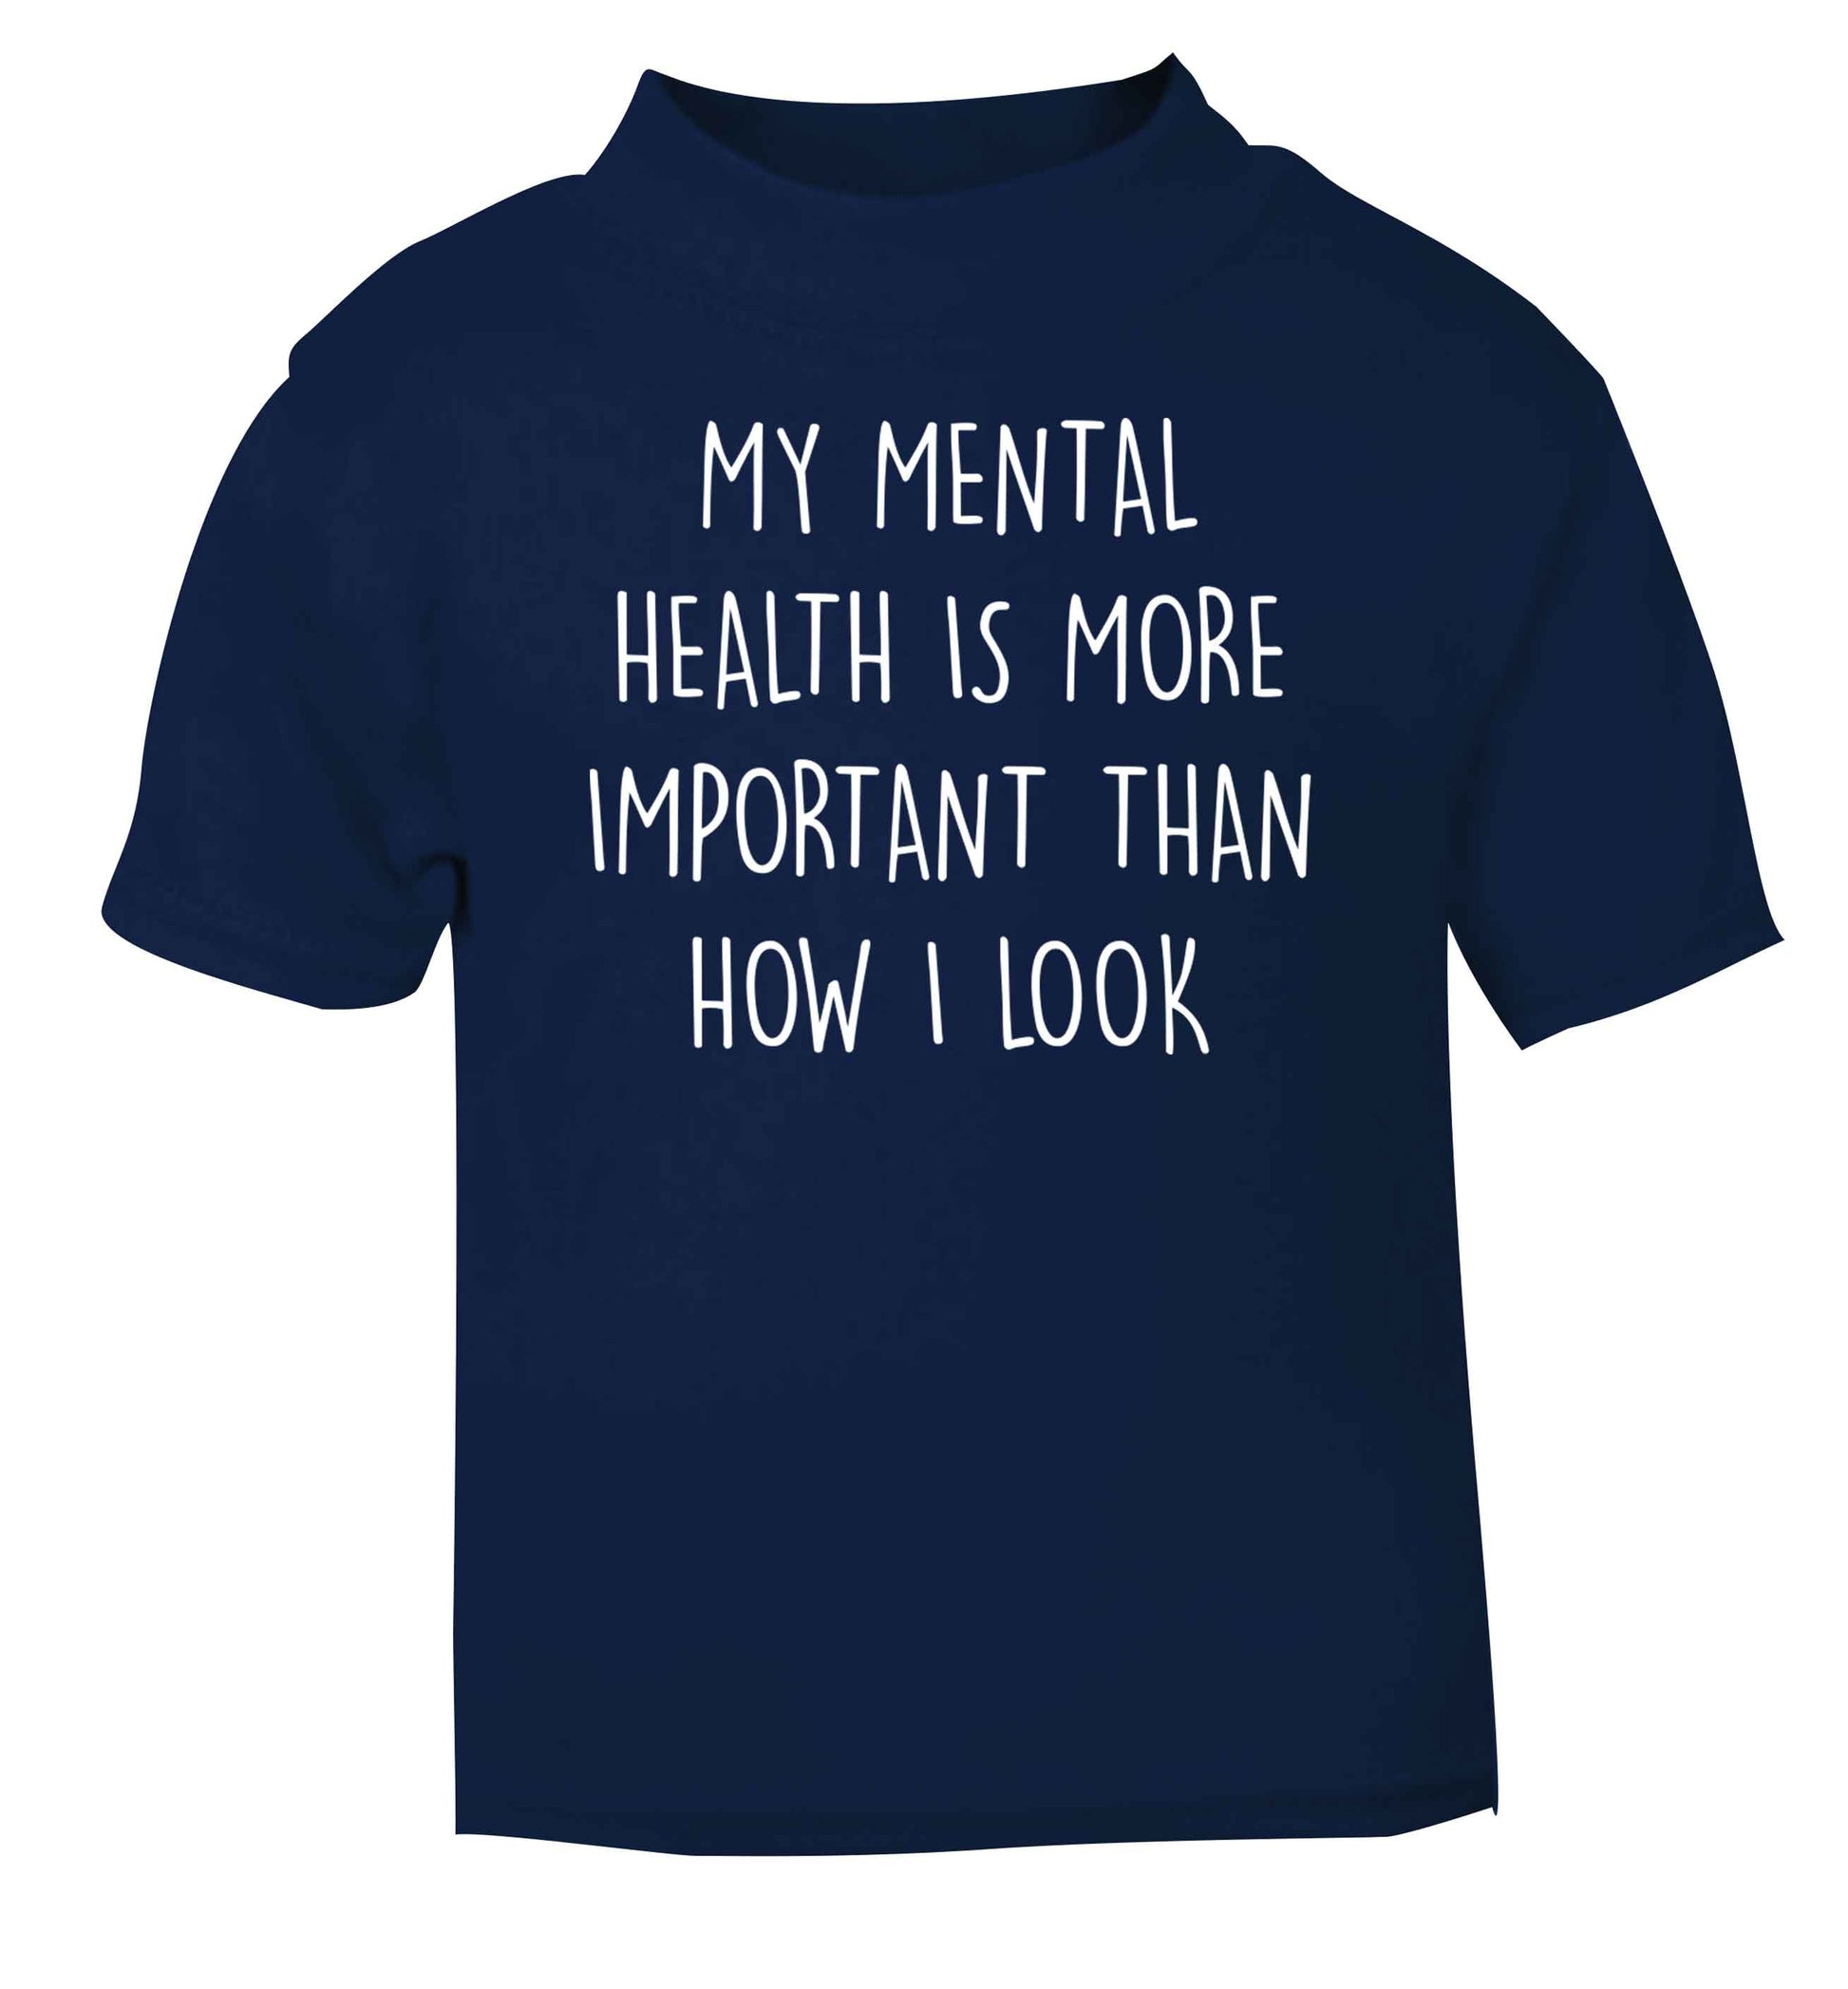 My mental health is more importnat than how I look navy baby toddler Tshirt 2 Years